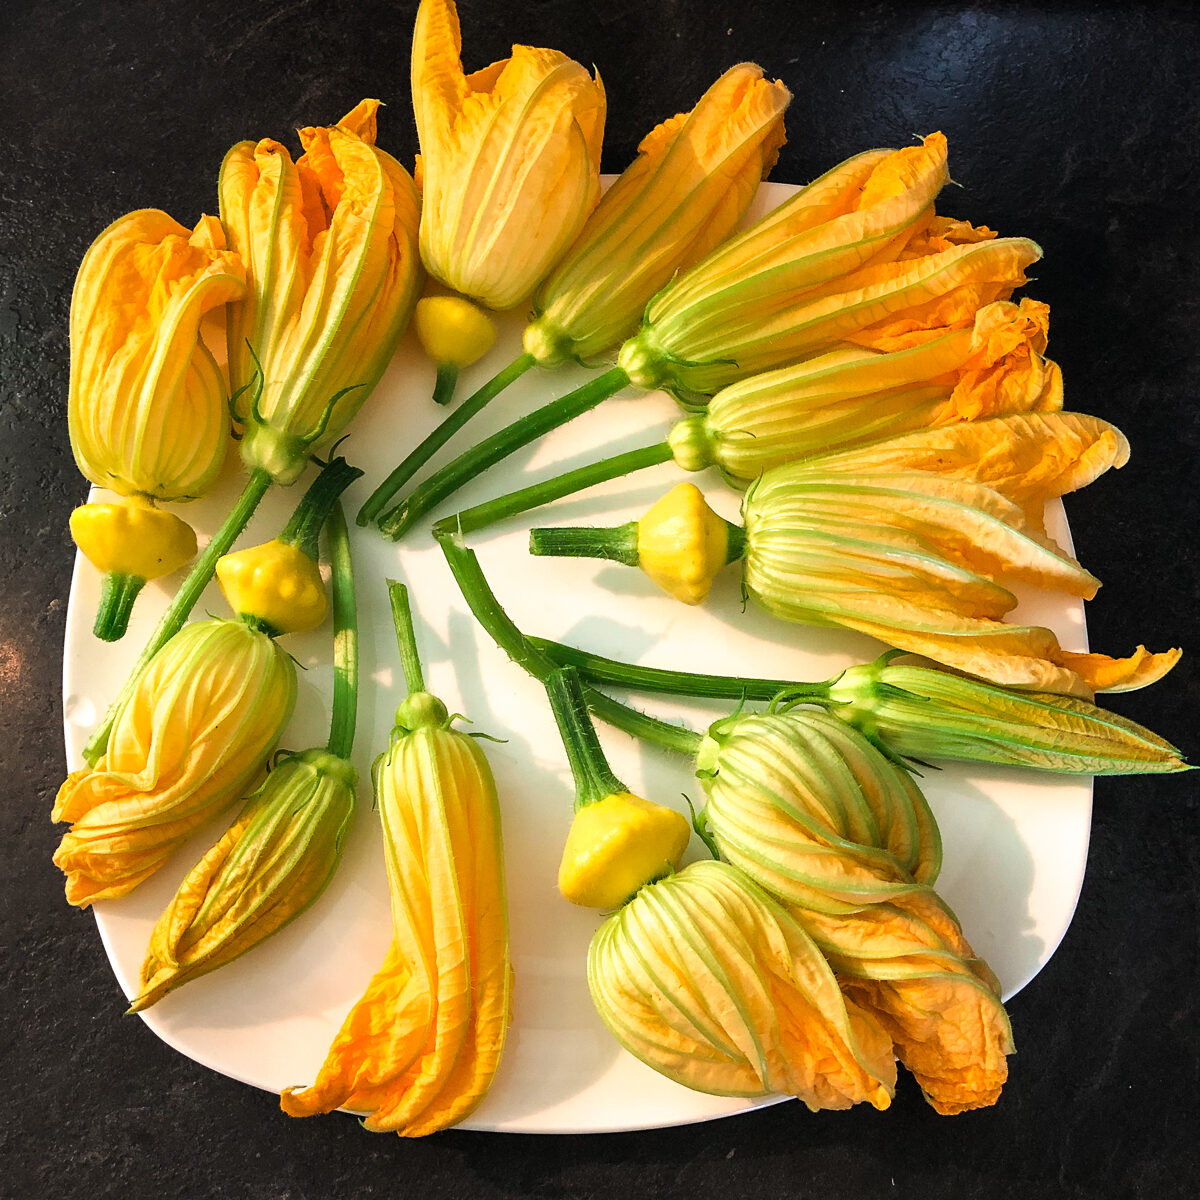 White square plate with a circle of bright yellow-orange zucchini flowers/blossoms with green stems.